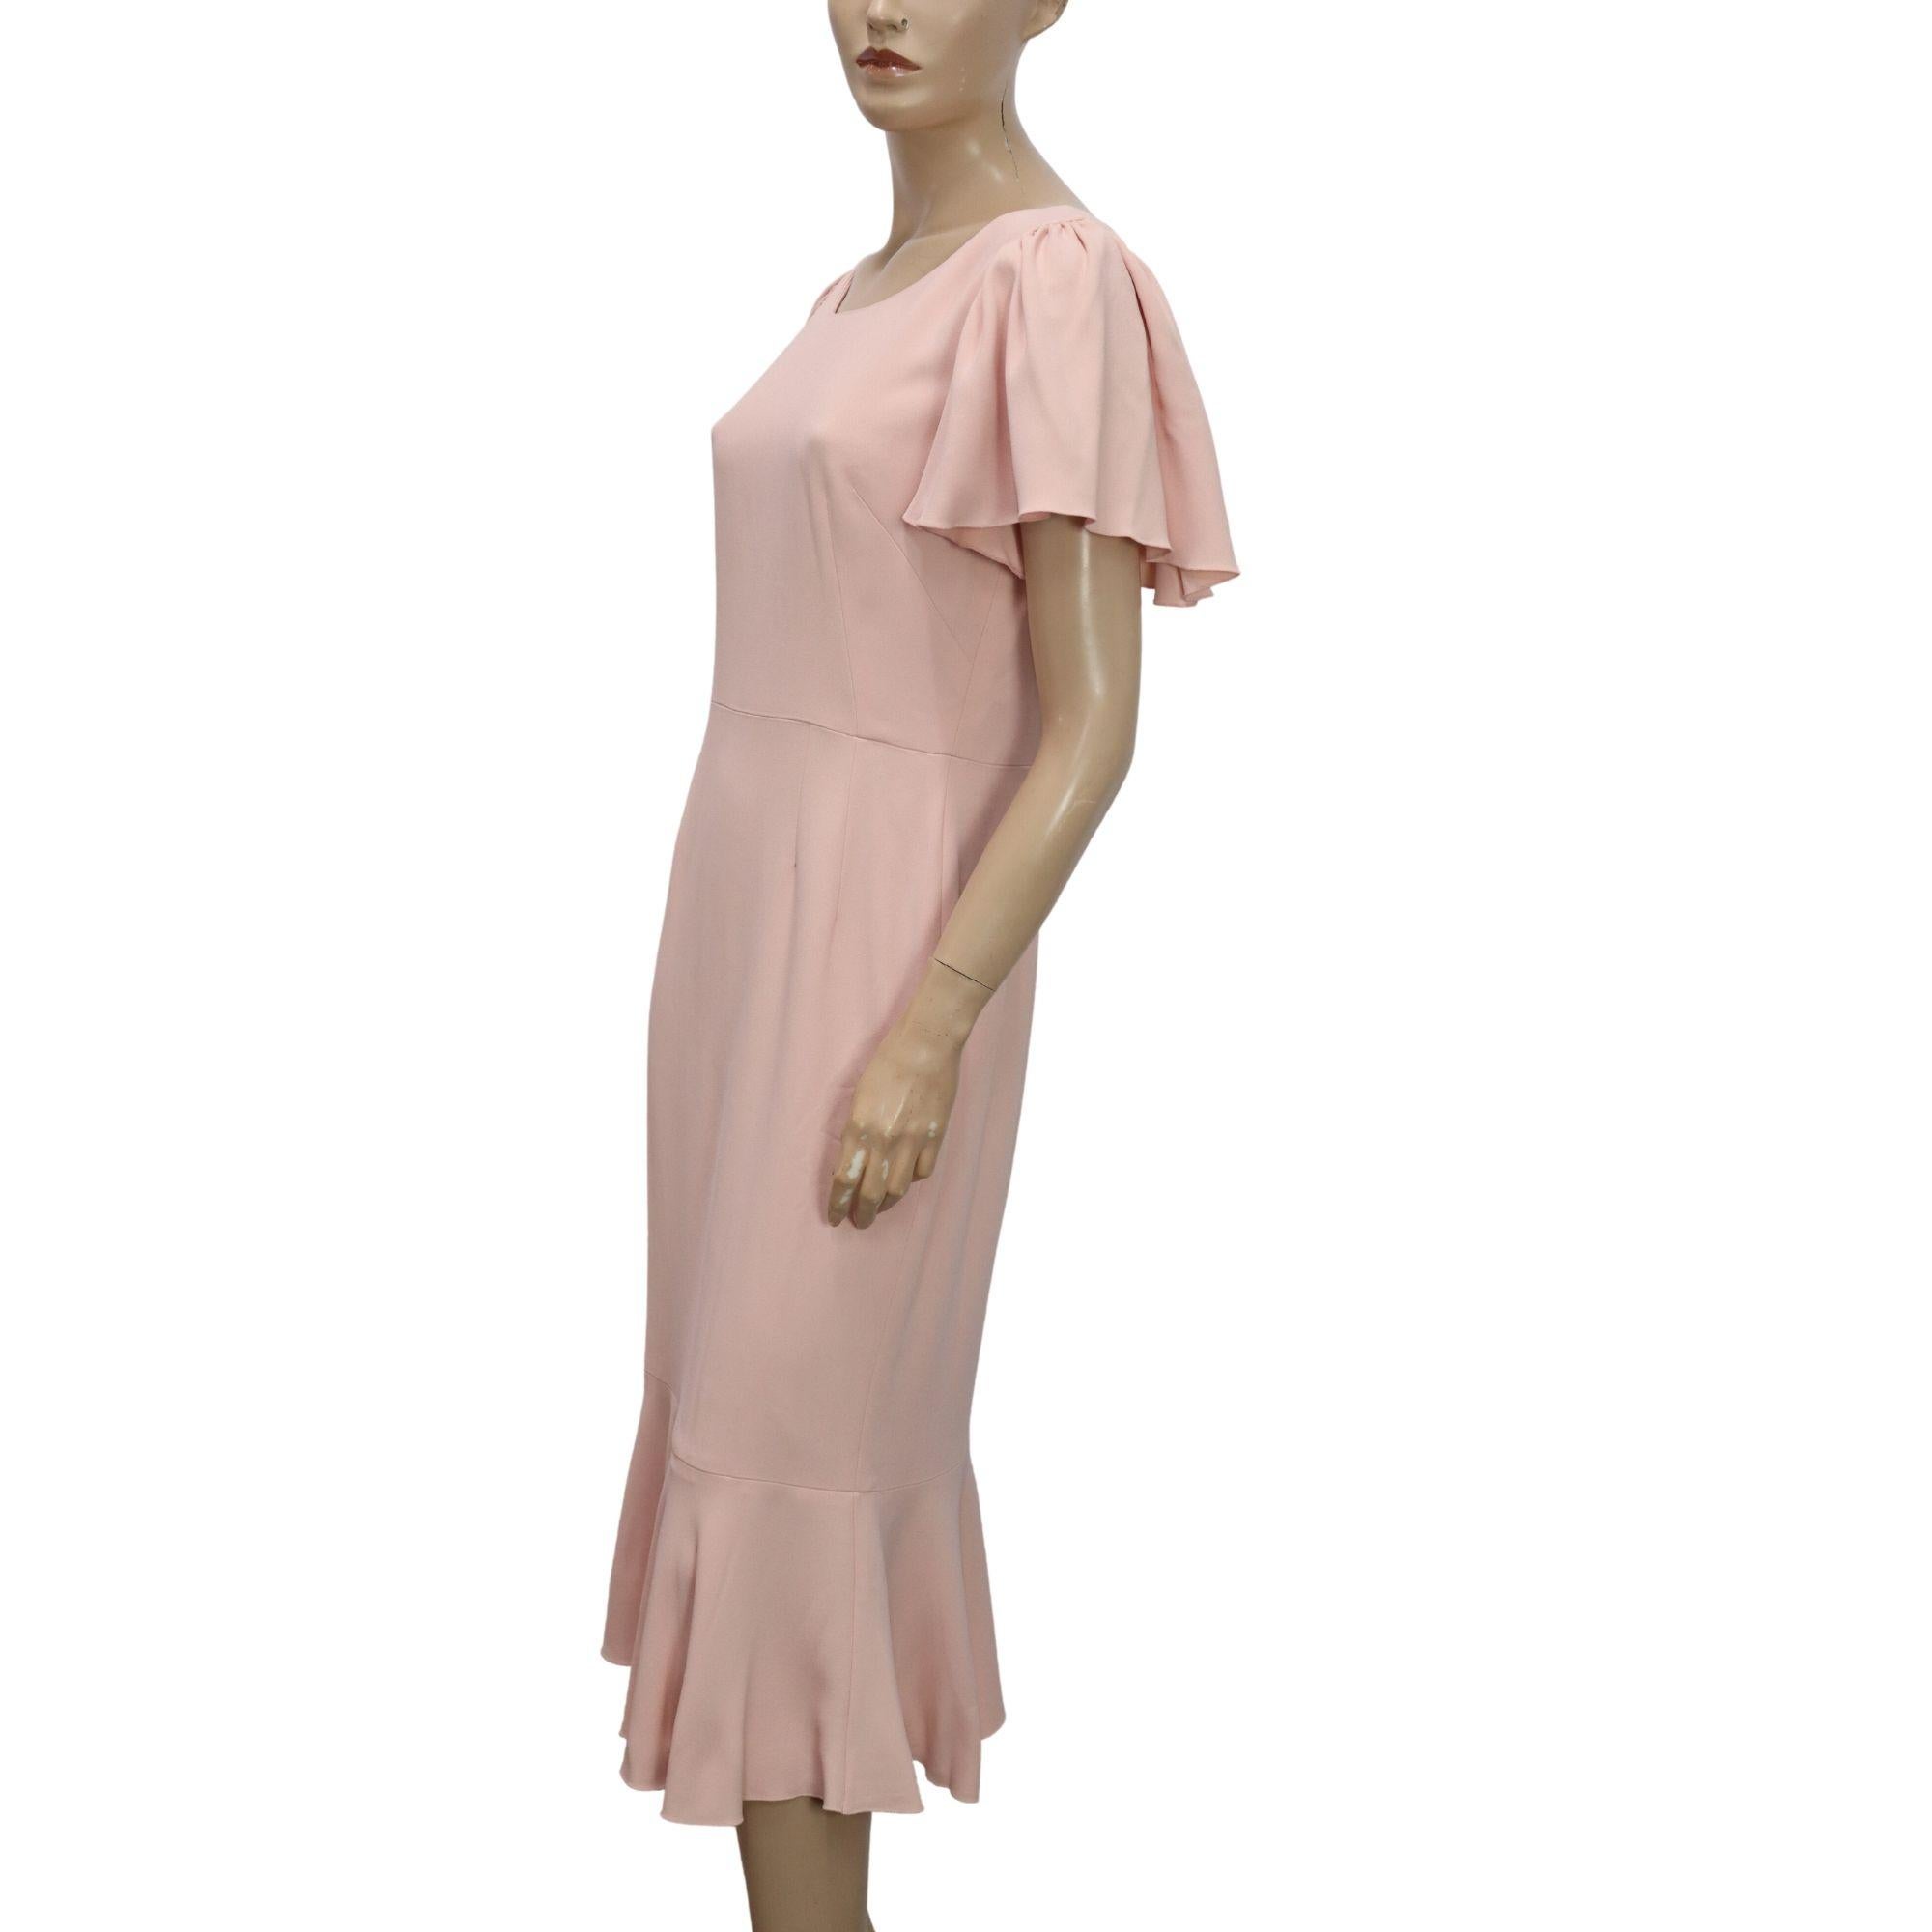 Dolce & Gabbana light pink flutter-sleeve ruffled hem dress.

Additional information:
Material: Viscose and Acetate 
Size: IT 44 / EU 40
Overall condition: Excellent